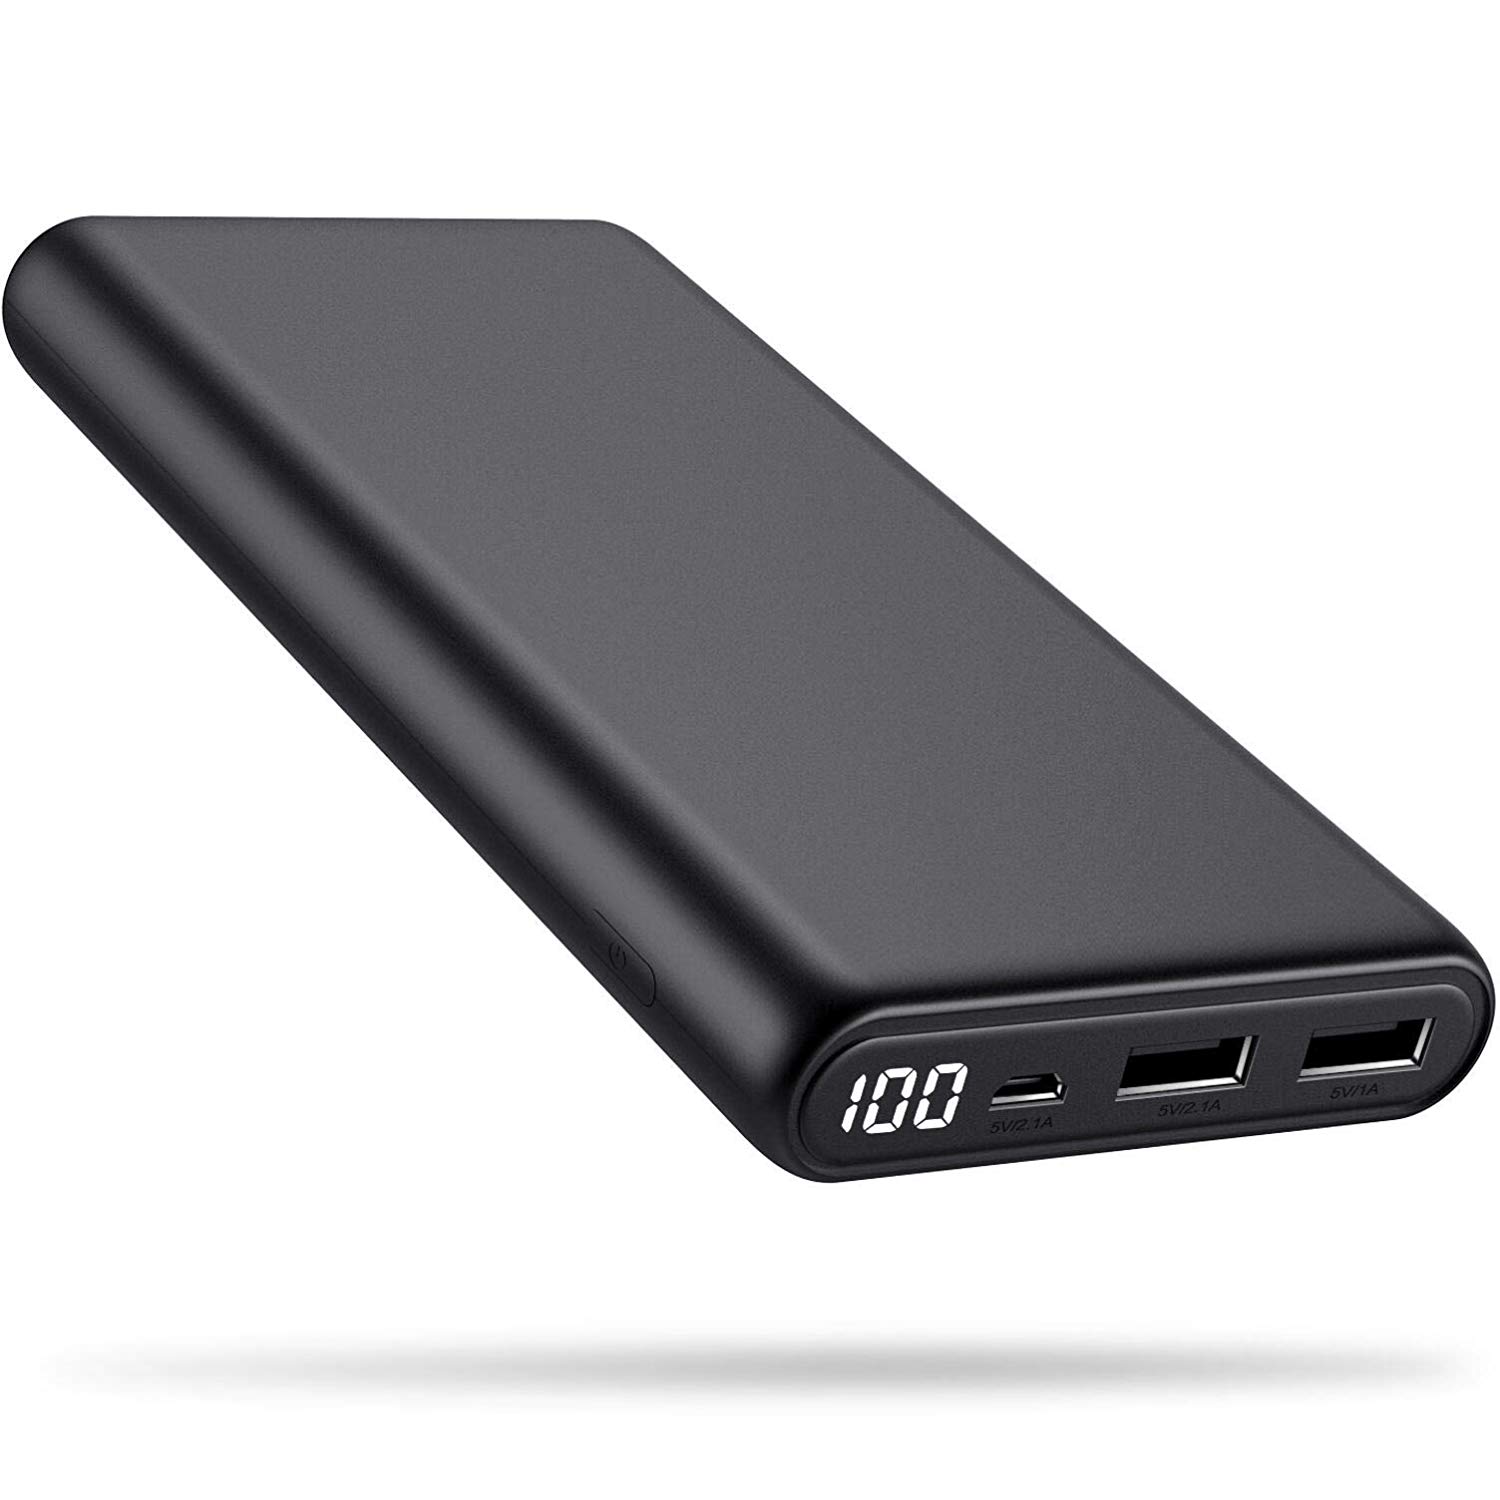 Xooparc 24800mAh High Capacity Power Bank with Dual Outputs and LCD ...